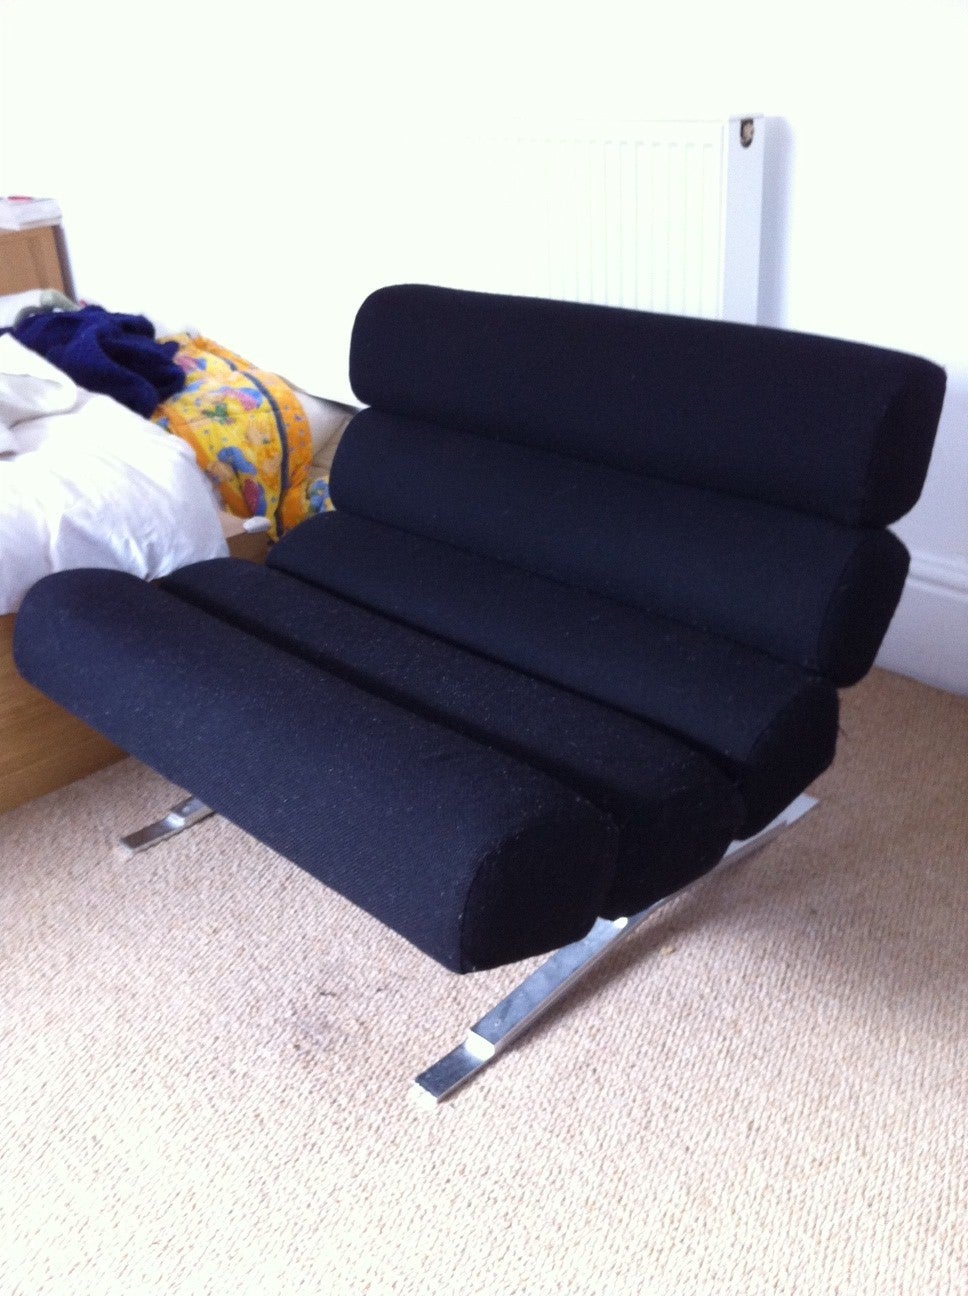 Vintage William Plunkett WP01 lounge chair c. late 1960's For Sale